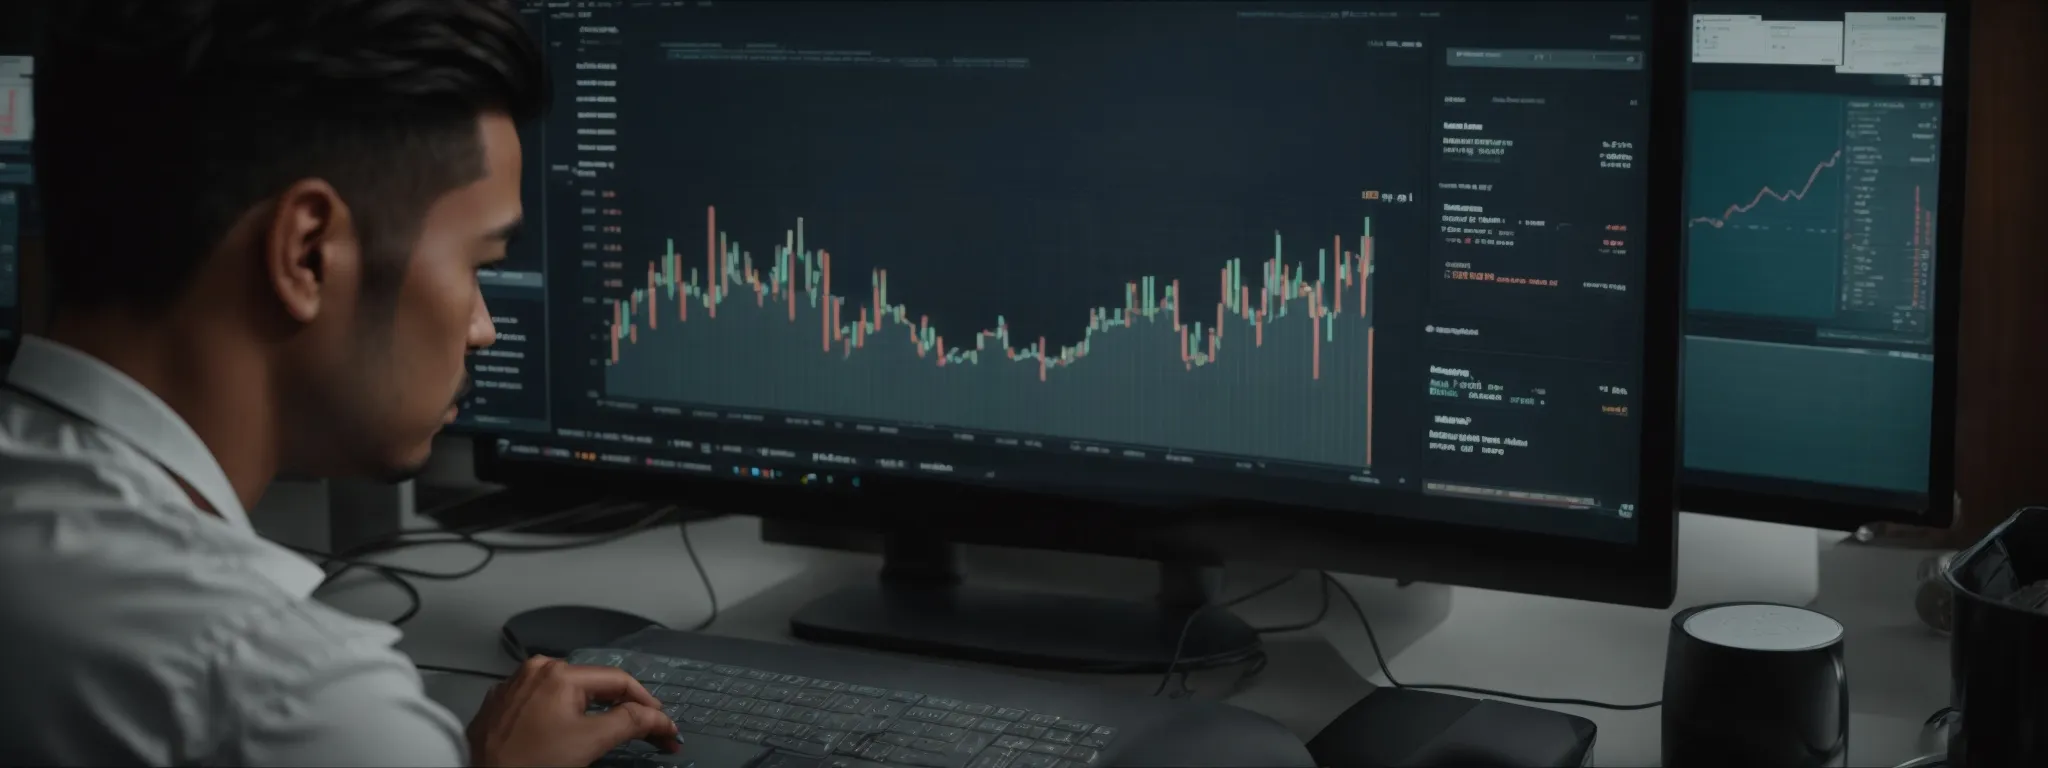 a marketer analyzes data charts on a computer screen, revealing diverse keyword trends and metrics.